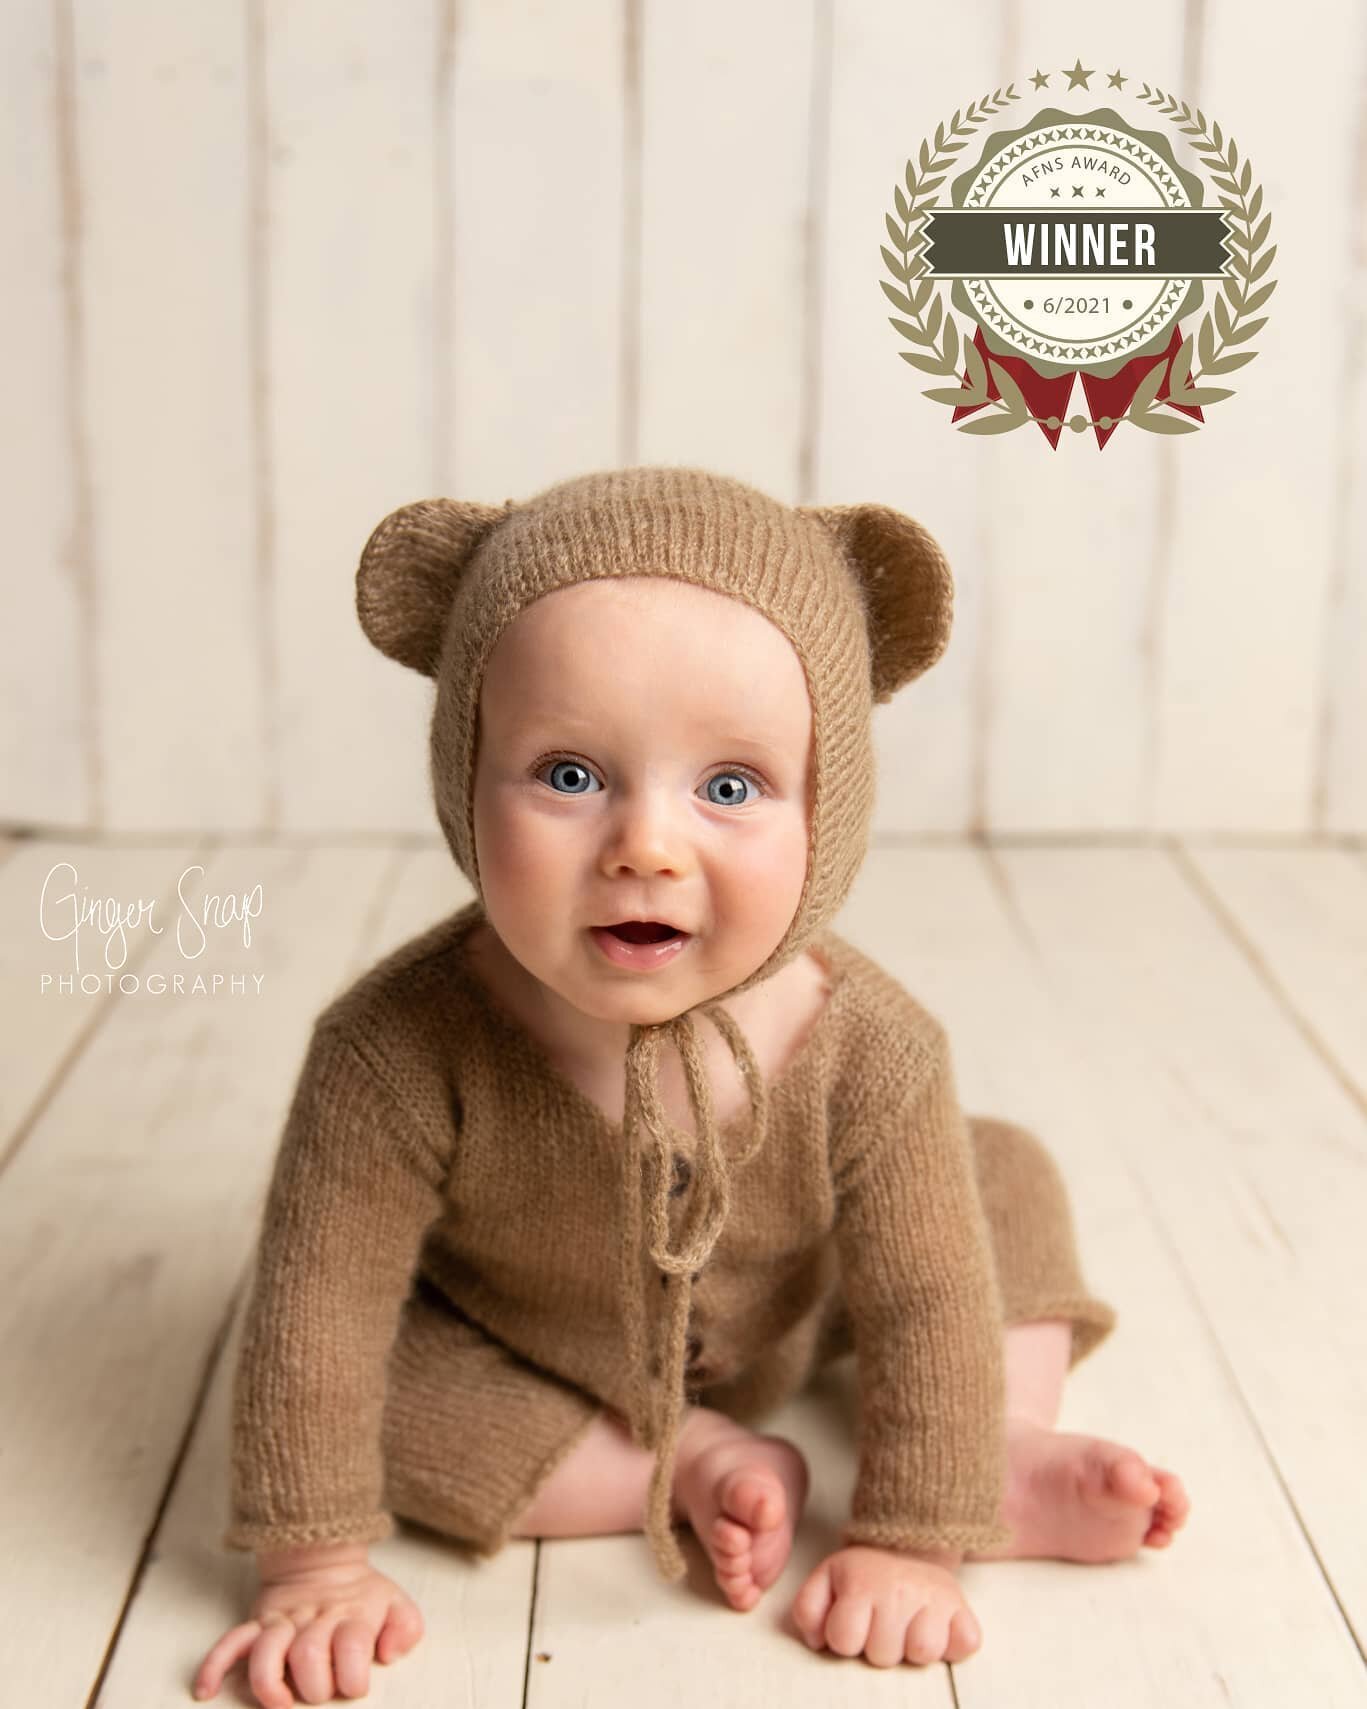 🏆 AWARD WINNING PHOTOGRAPHER 🏆
This was a nice surprise! I recently submitted some of my images in the AFNS awards &quot;for the best photographers in the field of newborn &amp; maternity photography.&quot; 4 of my images received awards as judged 